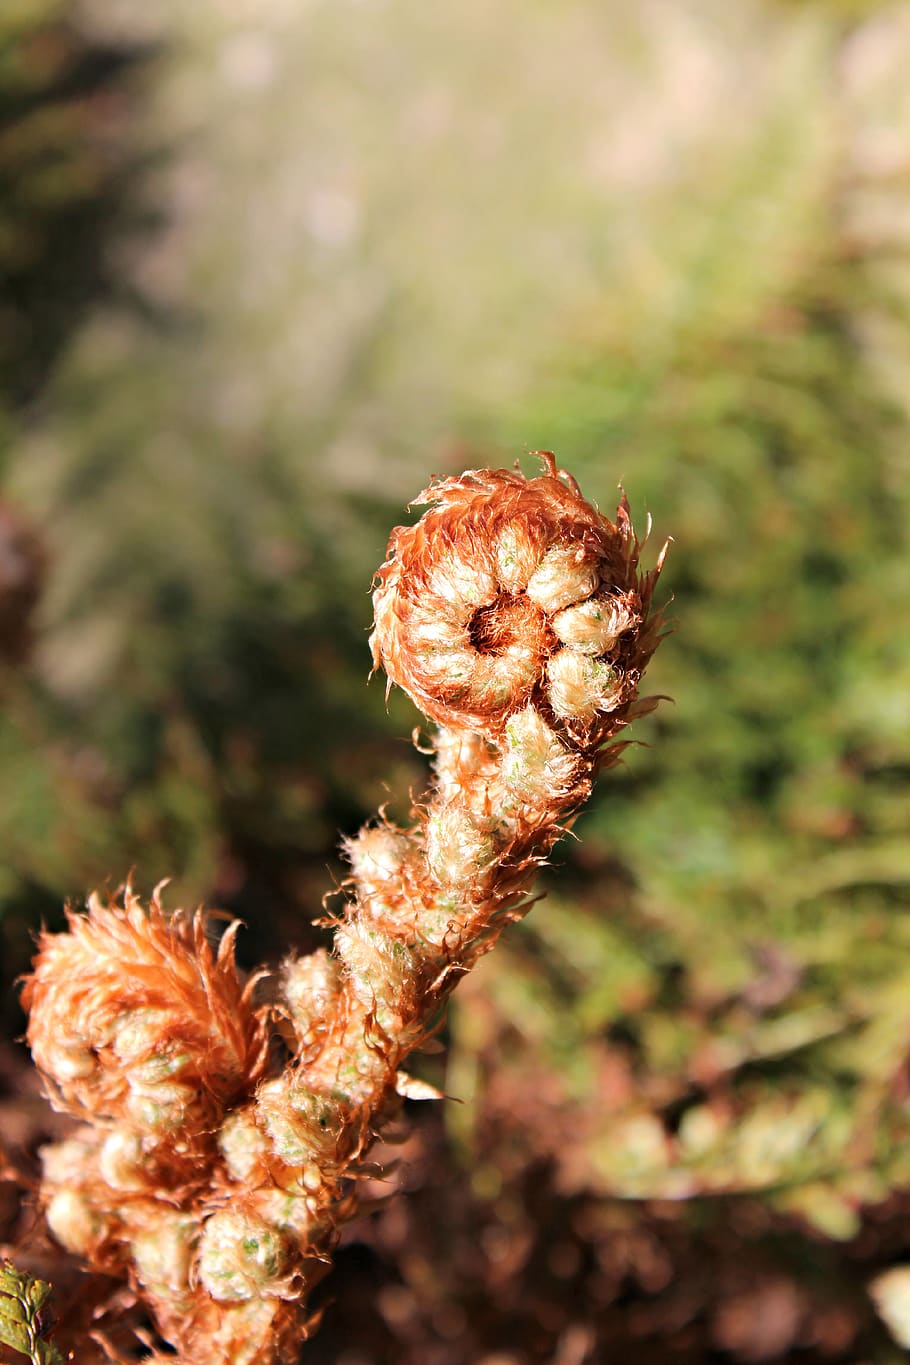 fiddlehead, fern, vessel sporenpflanze, plant, close-up, nature, day, focus on foreground, growth, beauty in nature